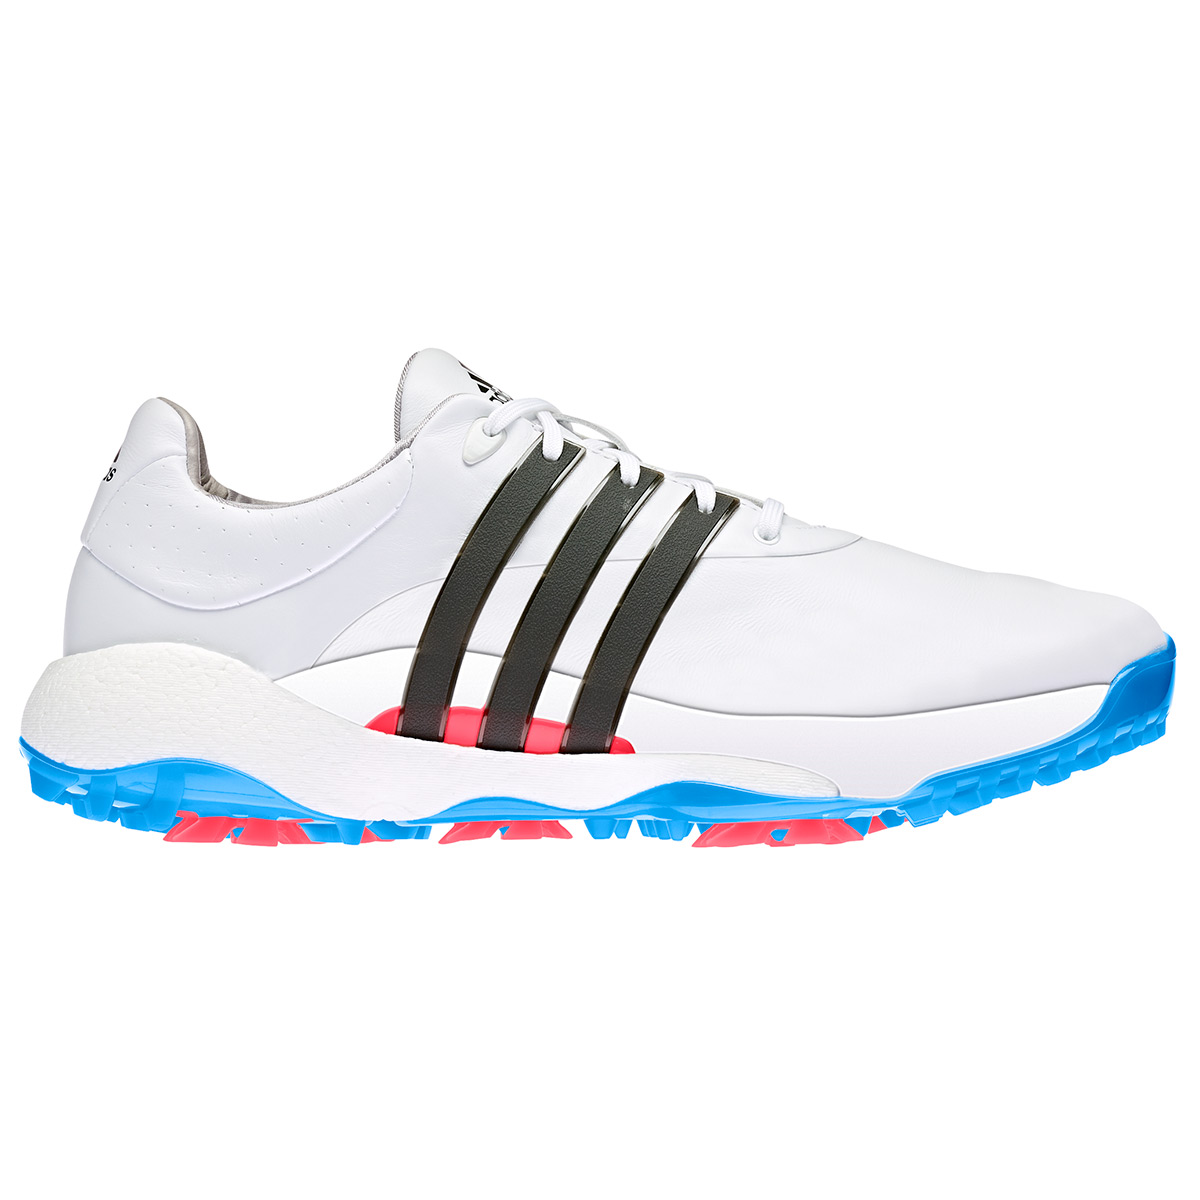 Dormitorio Alargar Tanzania adidas Men's Tour360 22 Waterproof Spiked Golf Shoes from american golf